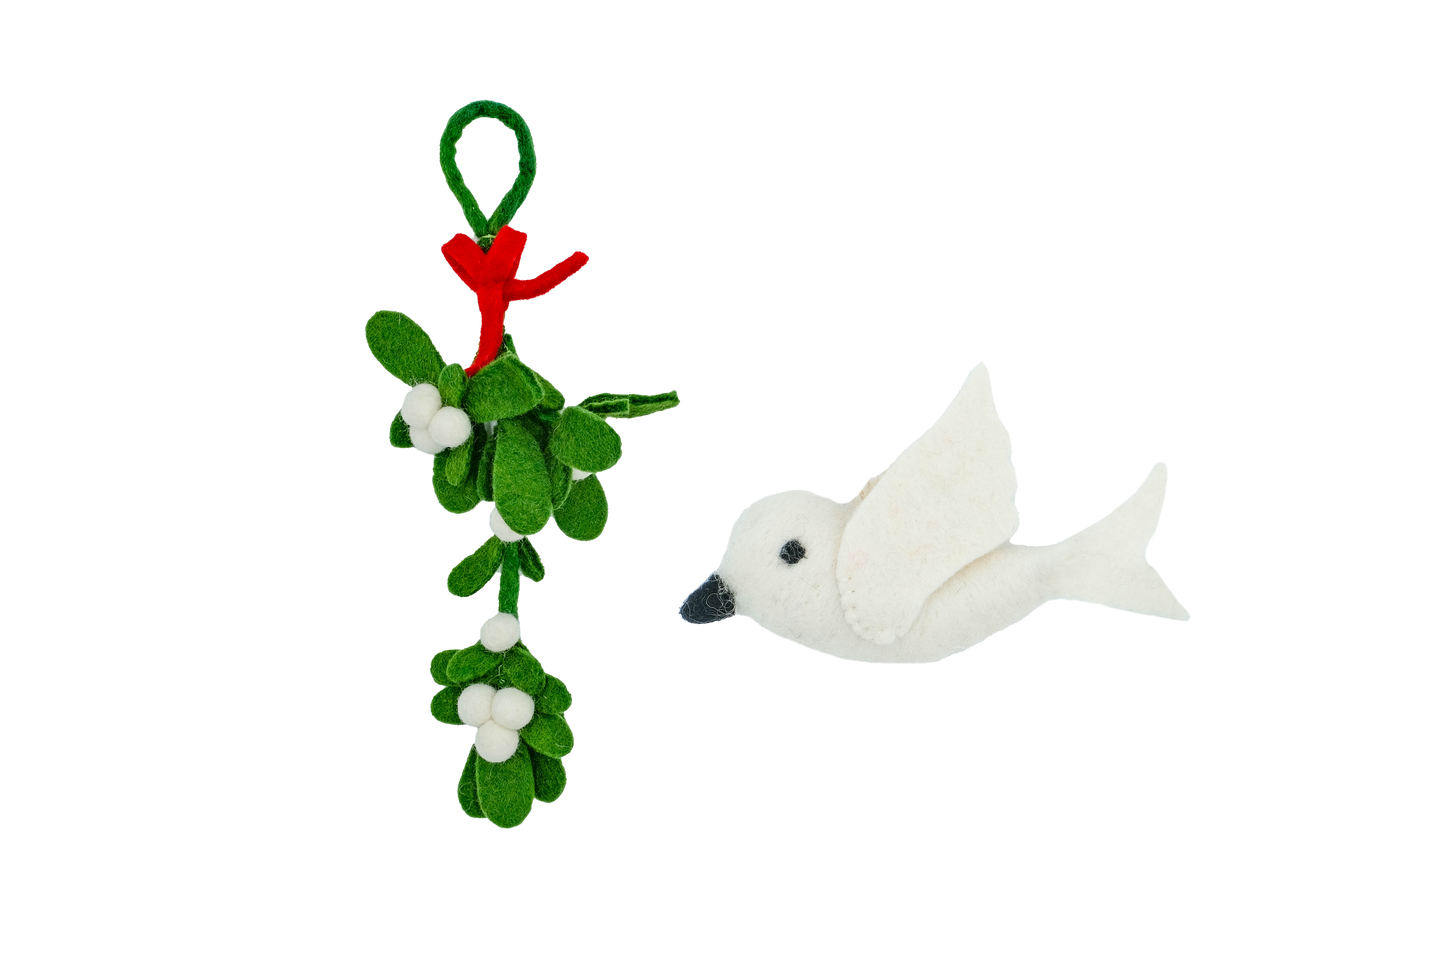 This Global Groove Life, handmade, ethical, fair trade, eco-friendly, sustainable, felt, green and white mistletoe and dove ornament set was created by artisans in Kathmandu Nepal and will be a beautiful addition to your Christmas tree this holiday season.